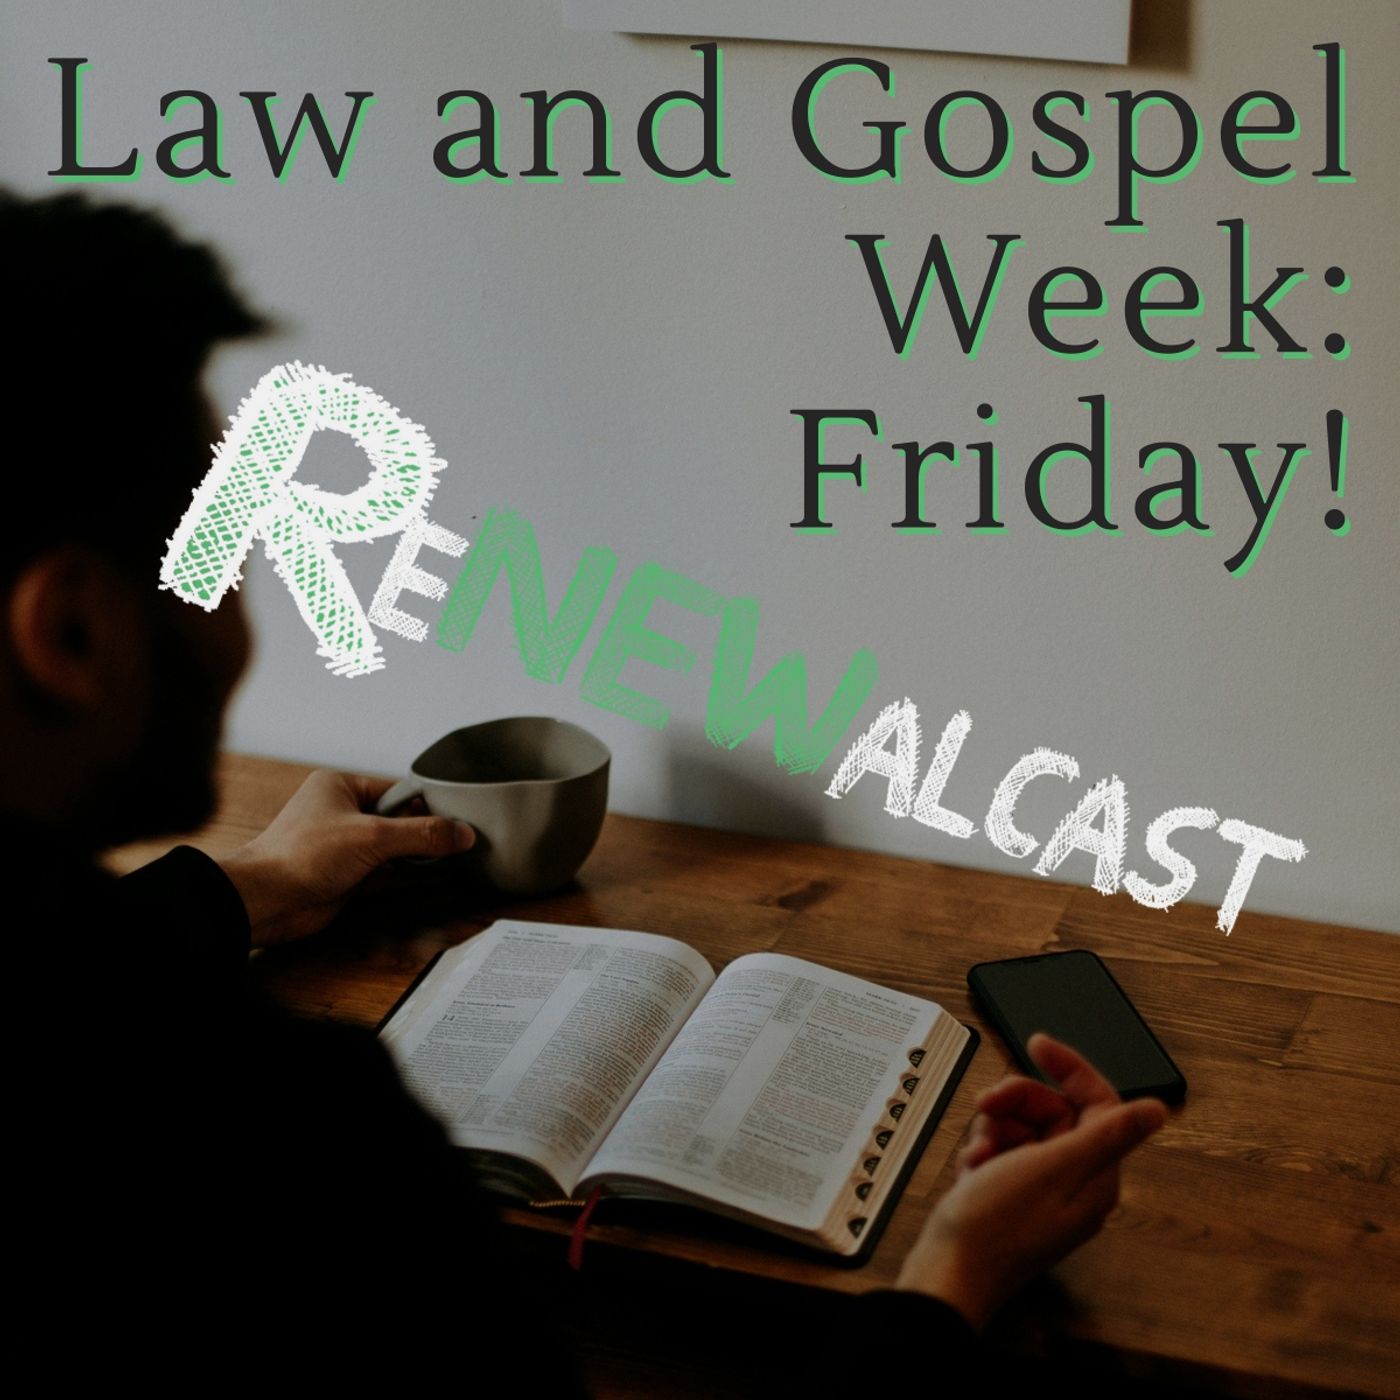 Law and Gospel Week: Friday!